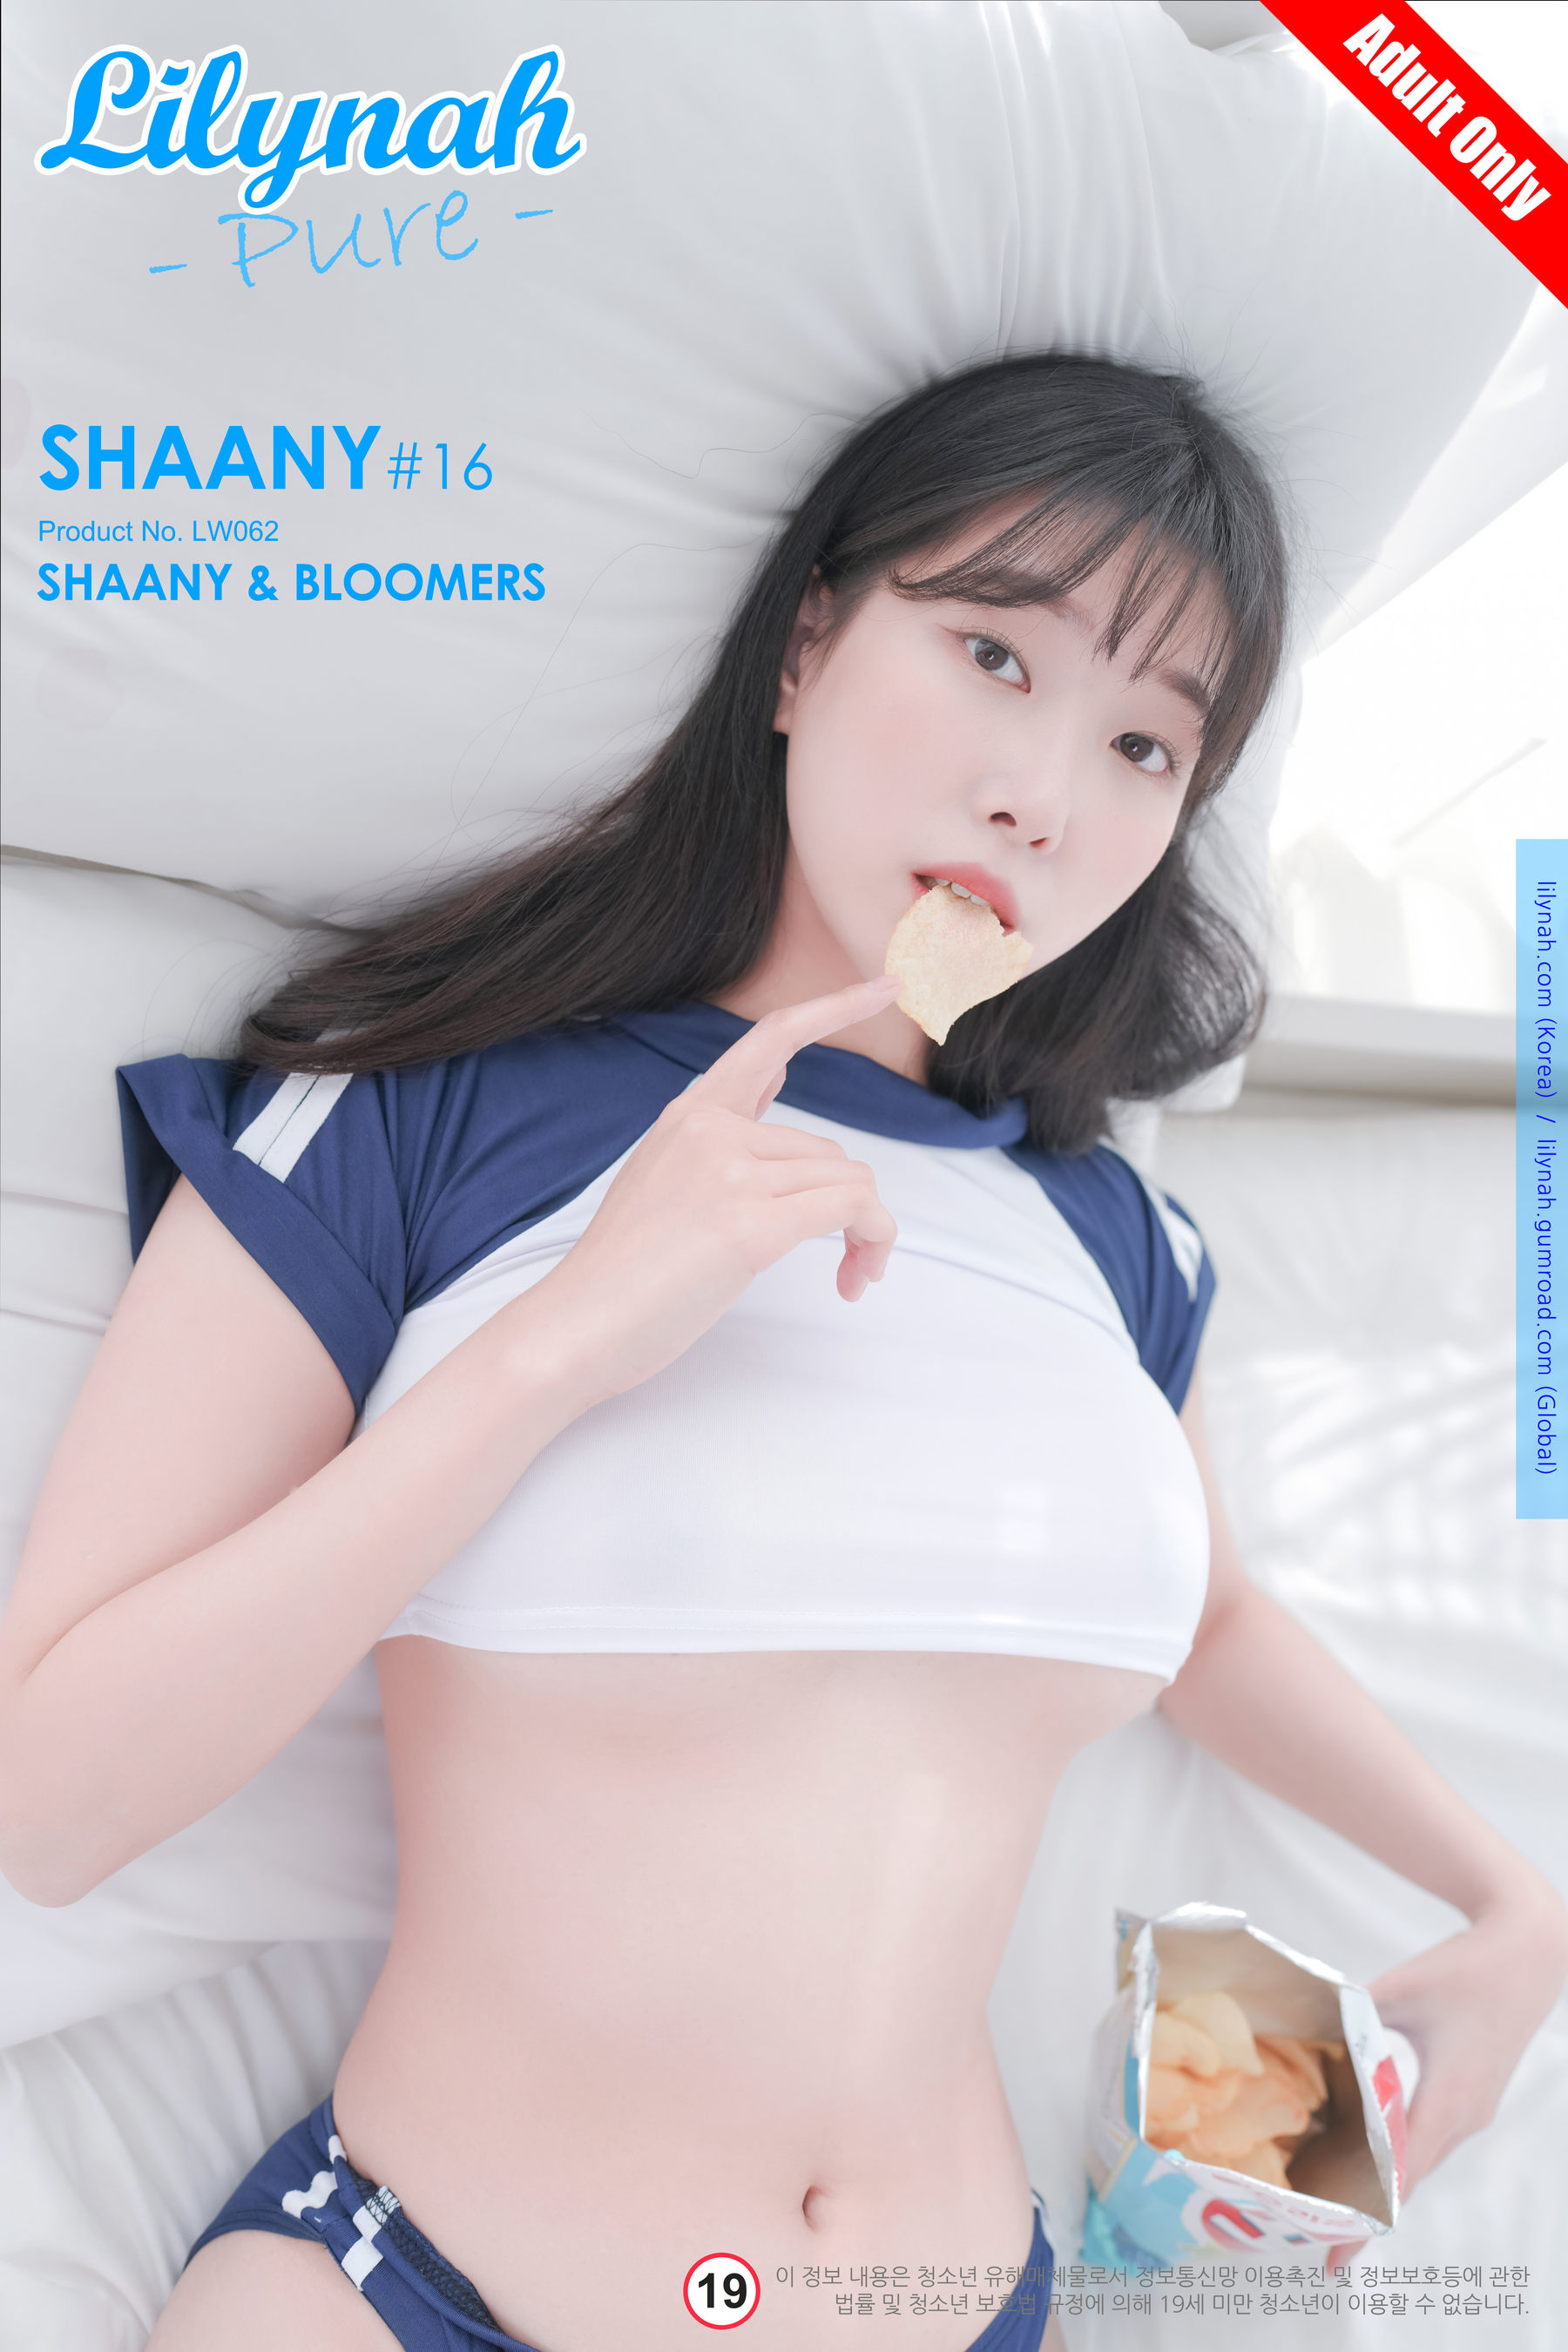 [Lilynah] Shaany - Vol.16 Shaany & Bloomers/(44P)